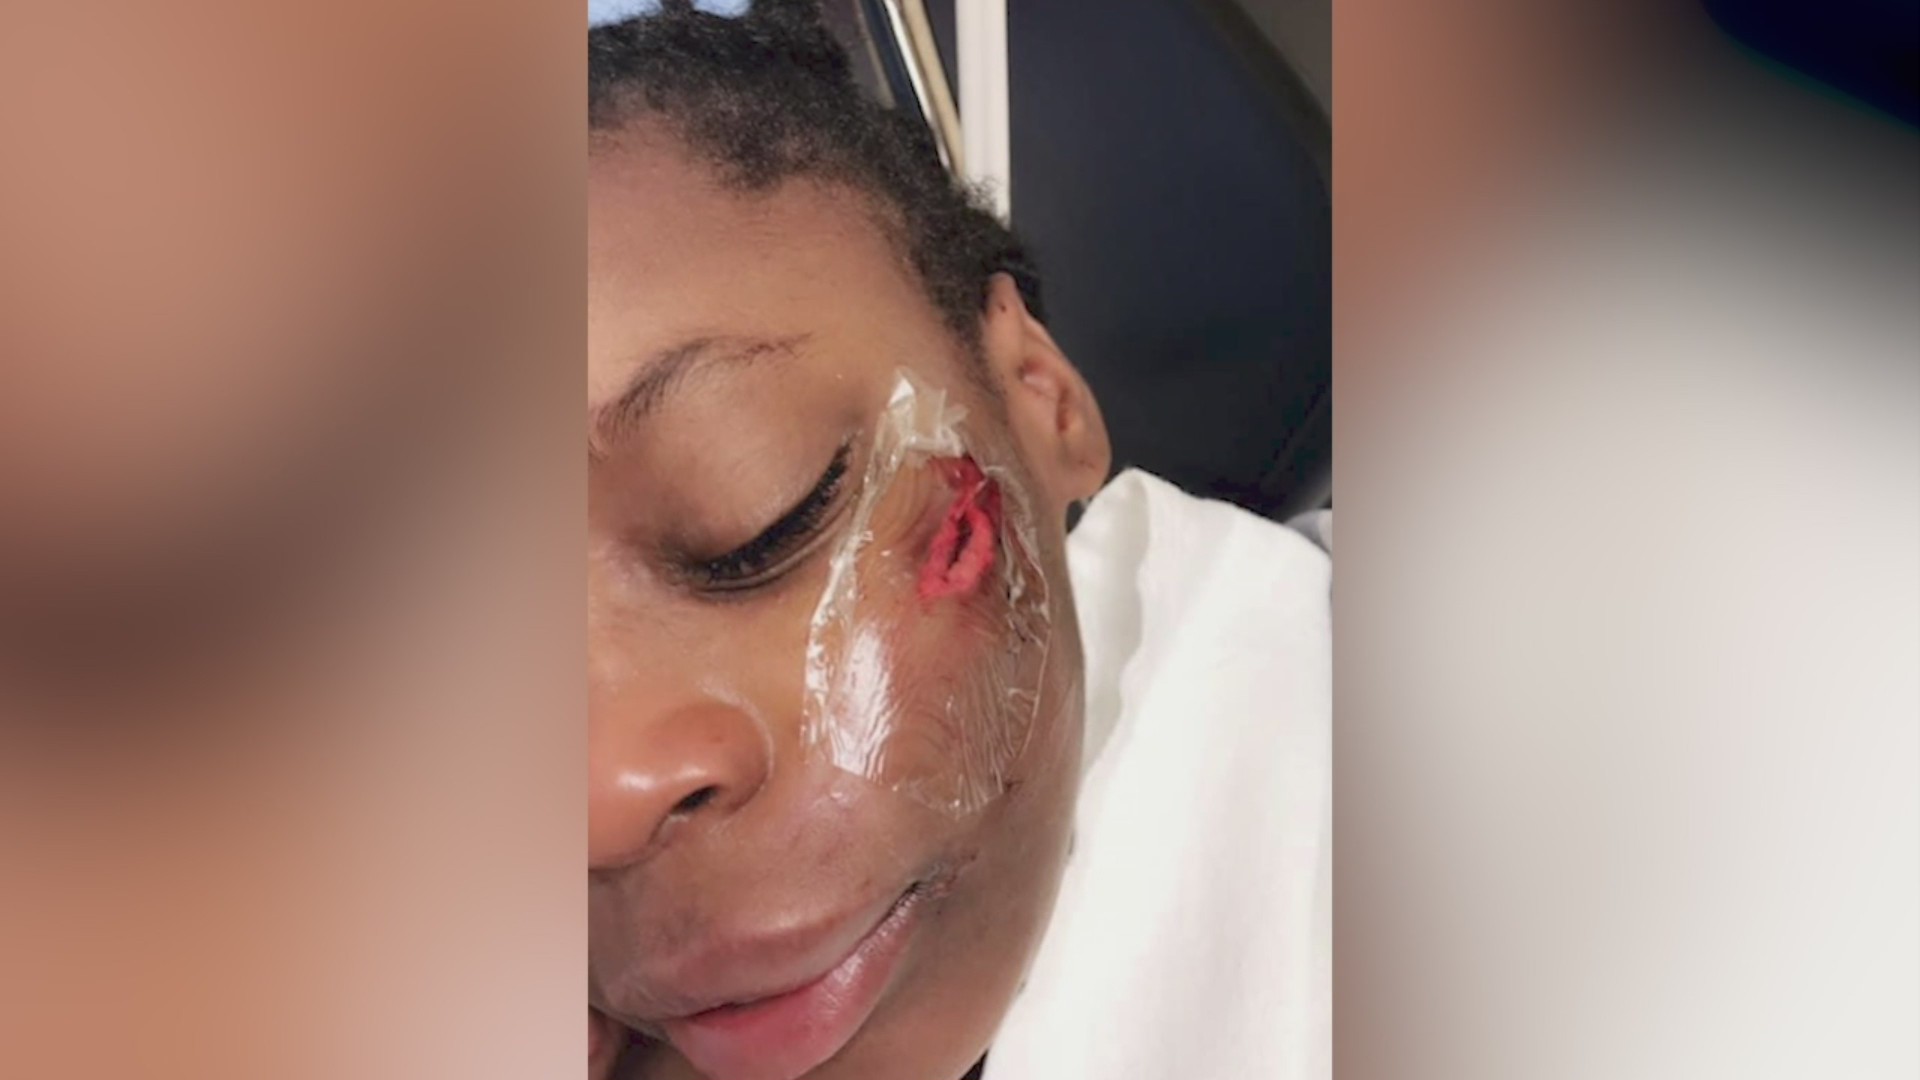 Racist Attack Leaves Young Black Girl Hospitalized Afte